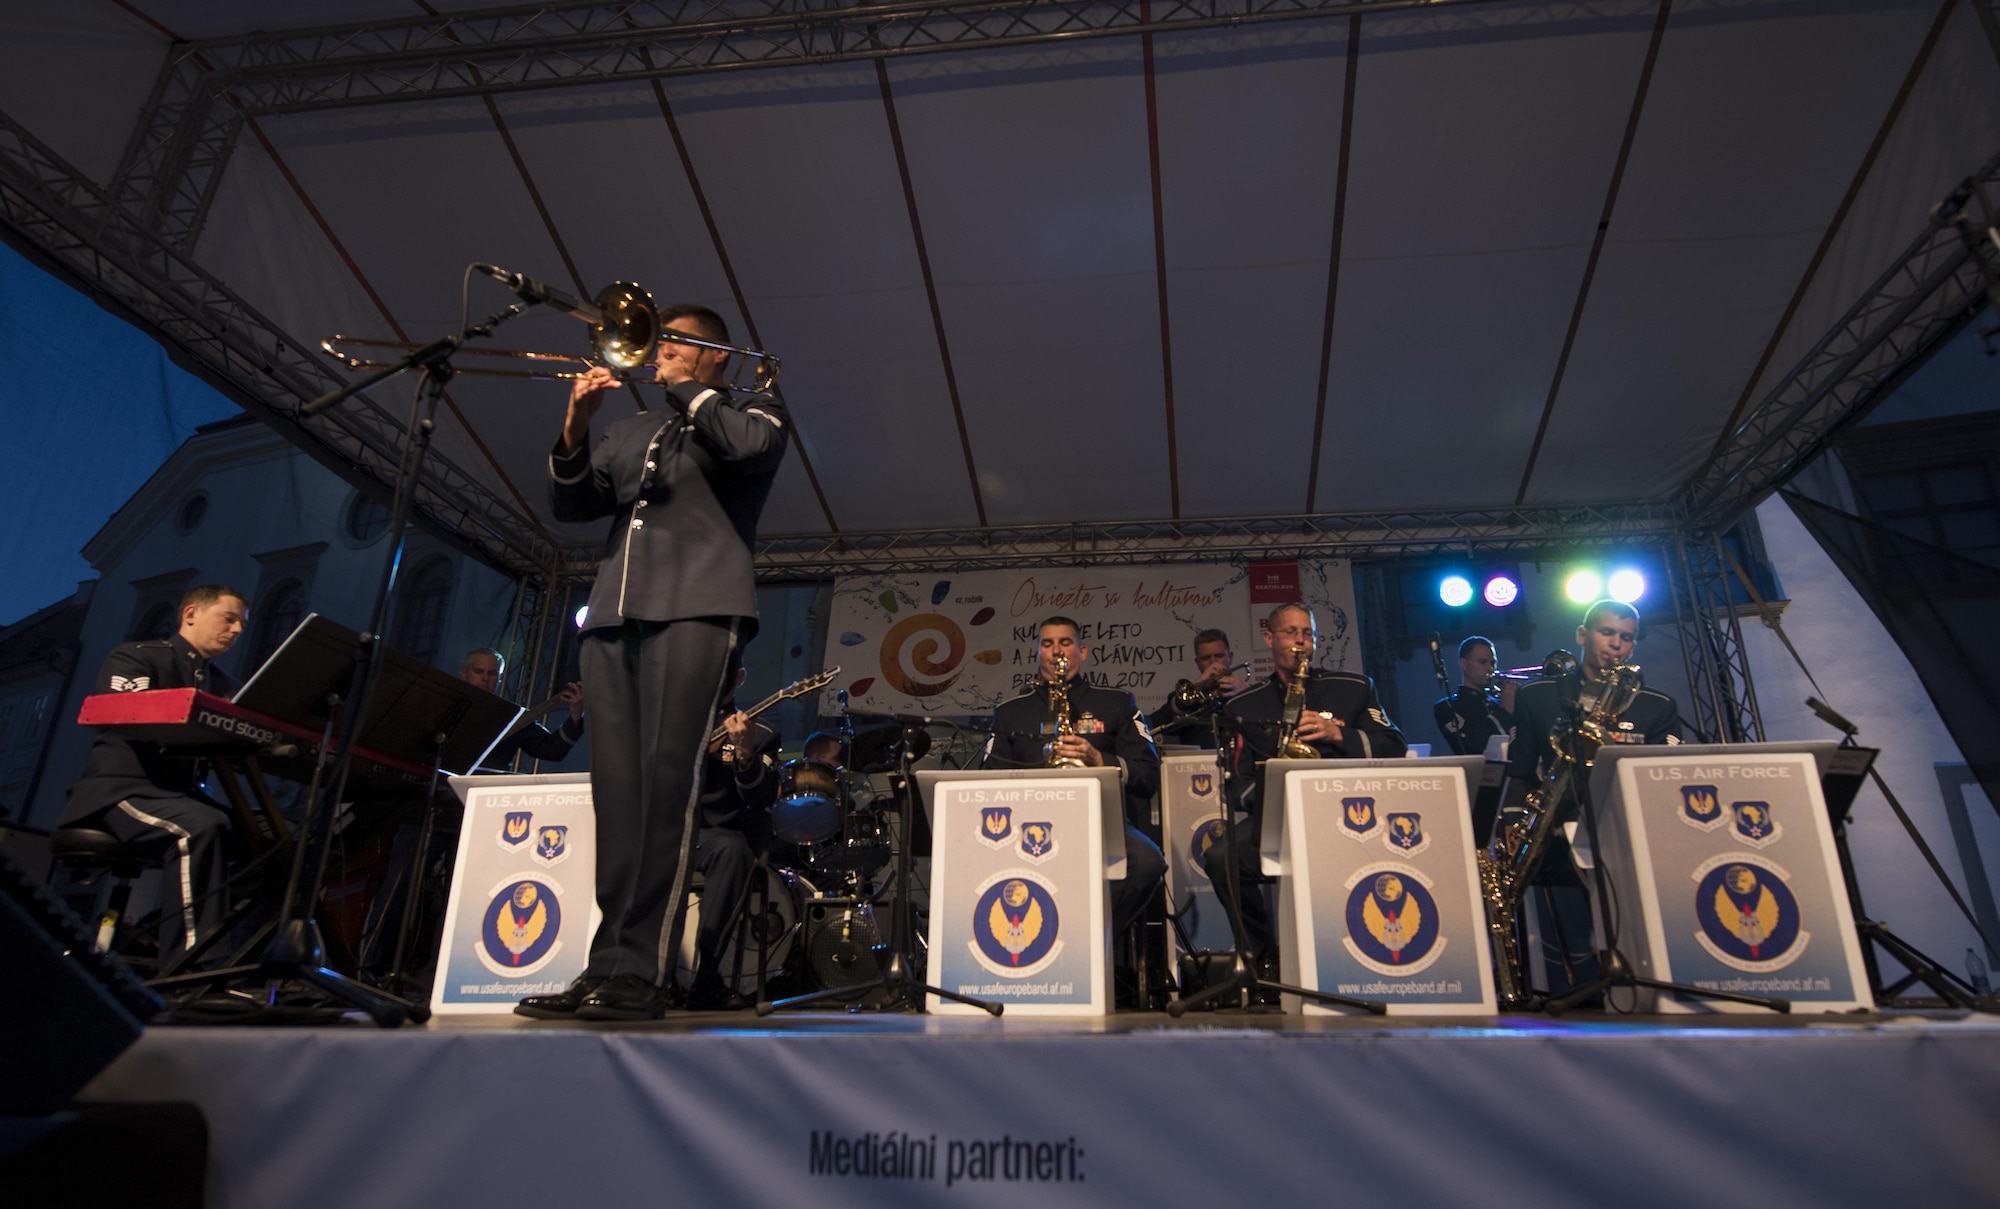 U.S. Air Force Staff Sgt. James Hubbard, U.S. Air Forces in Europe jazz band trombone, plays a solo during a concert for the 73rd anniversary of the Slovak National Uprising in Bratislava, Slovakia, Aug. 30, 2017. On Aug. 29, 1944, the Slovakian army started an uprising against the pro-Nazi government of the time. The USAFE band represents unique international musical heritage, building and preserving partnerships through official multi-national military and international community outreach events. (U.S. Air Force photo by Senior Airman Tryphena Mayhugh)